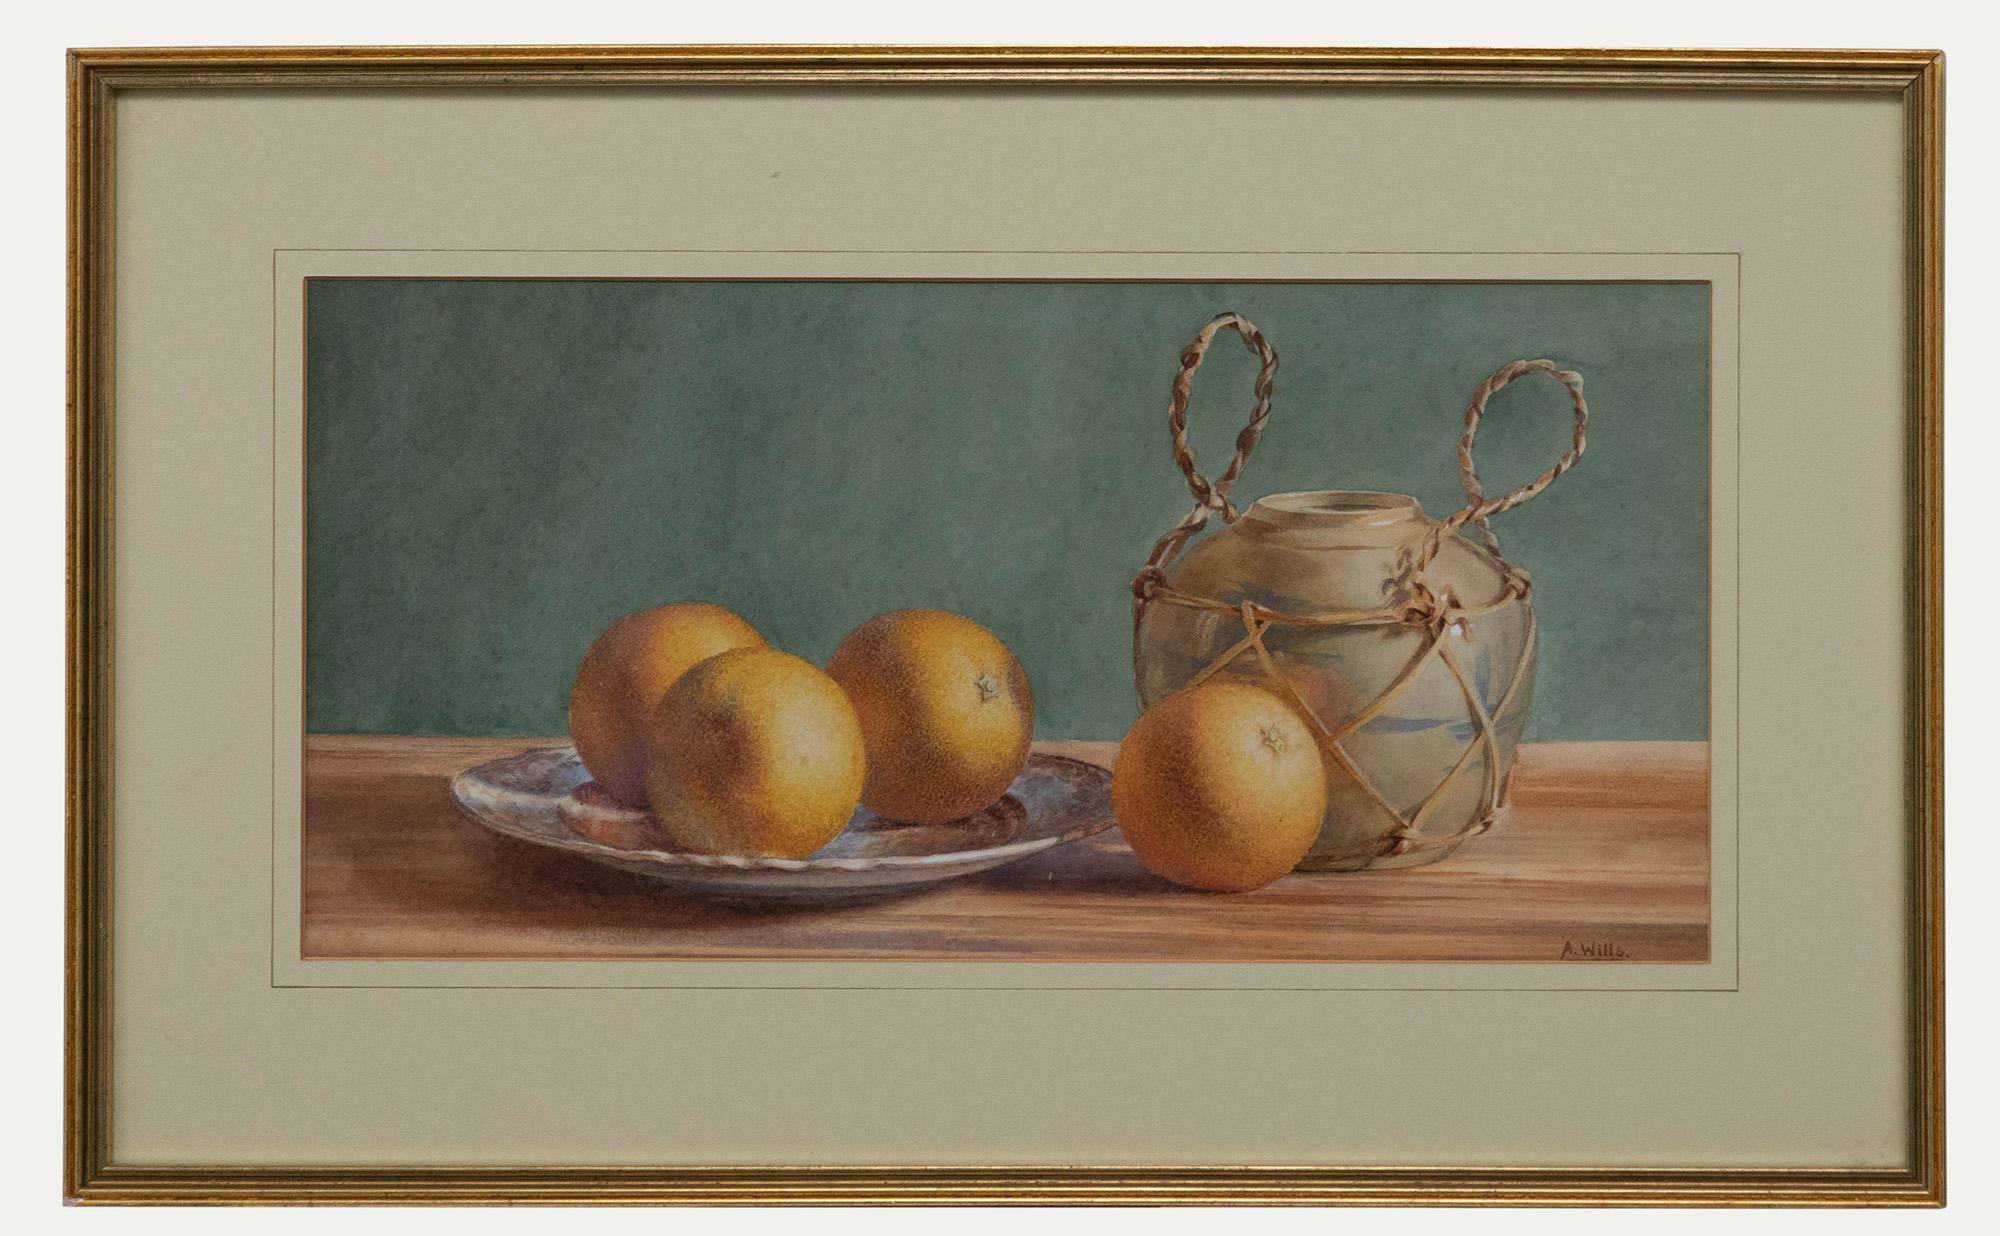 Unknown Still-Life - A. Wills - Framed Early 20th Century Watercolour, Still Life of Oranges